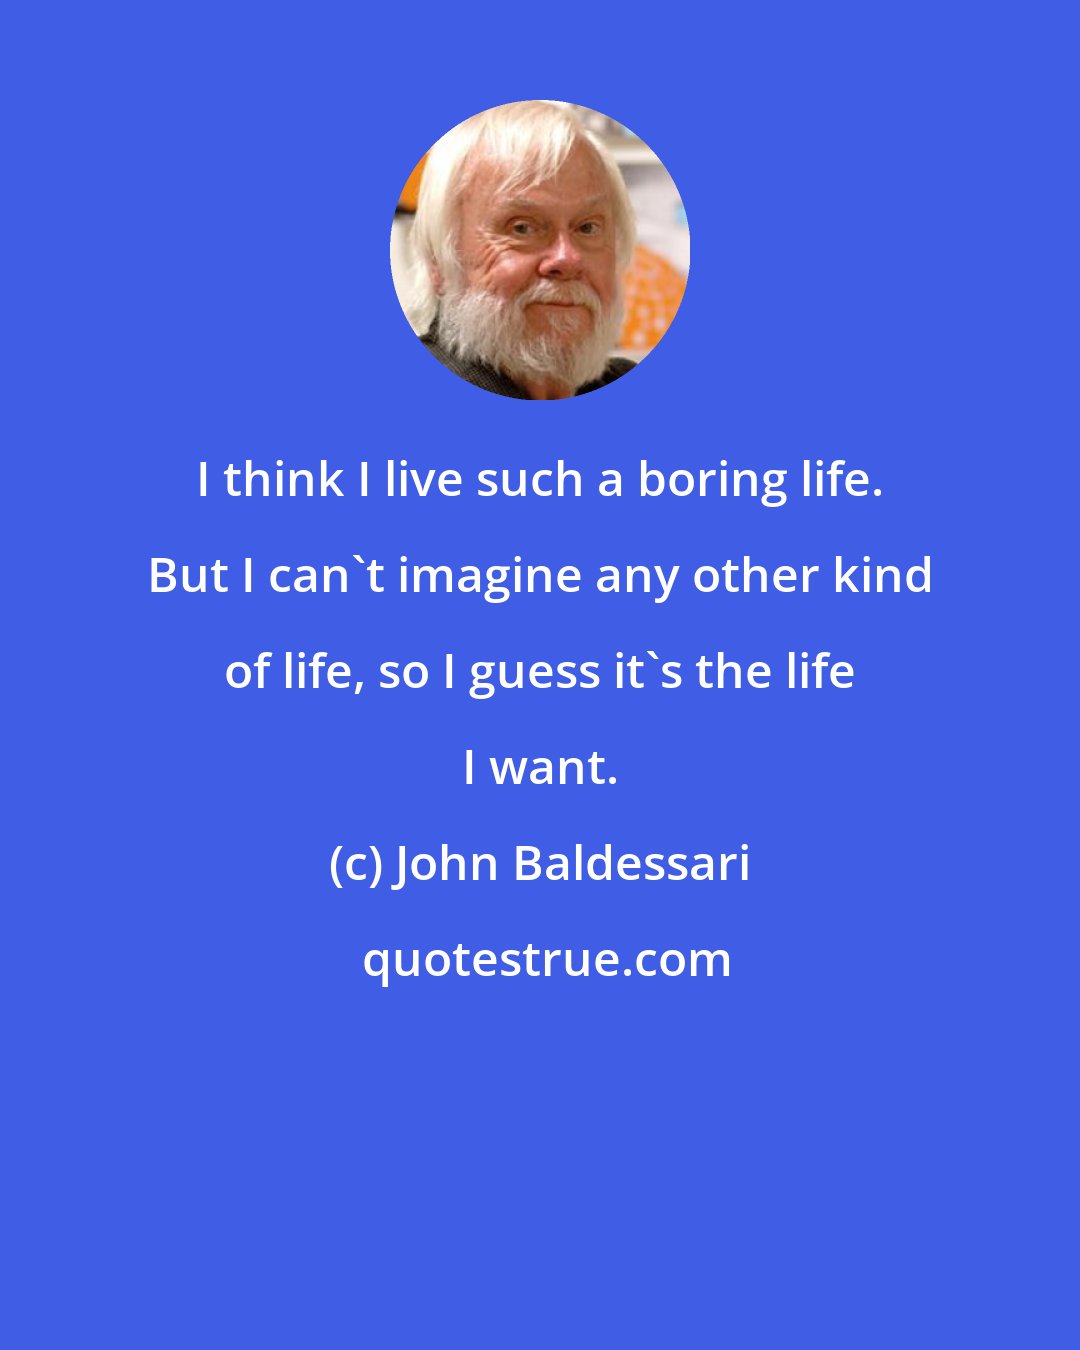 John Baldessari: I think I live such a boring life. But I can't imagine any other kind of life, so I guess it's the life I want.